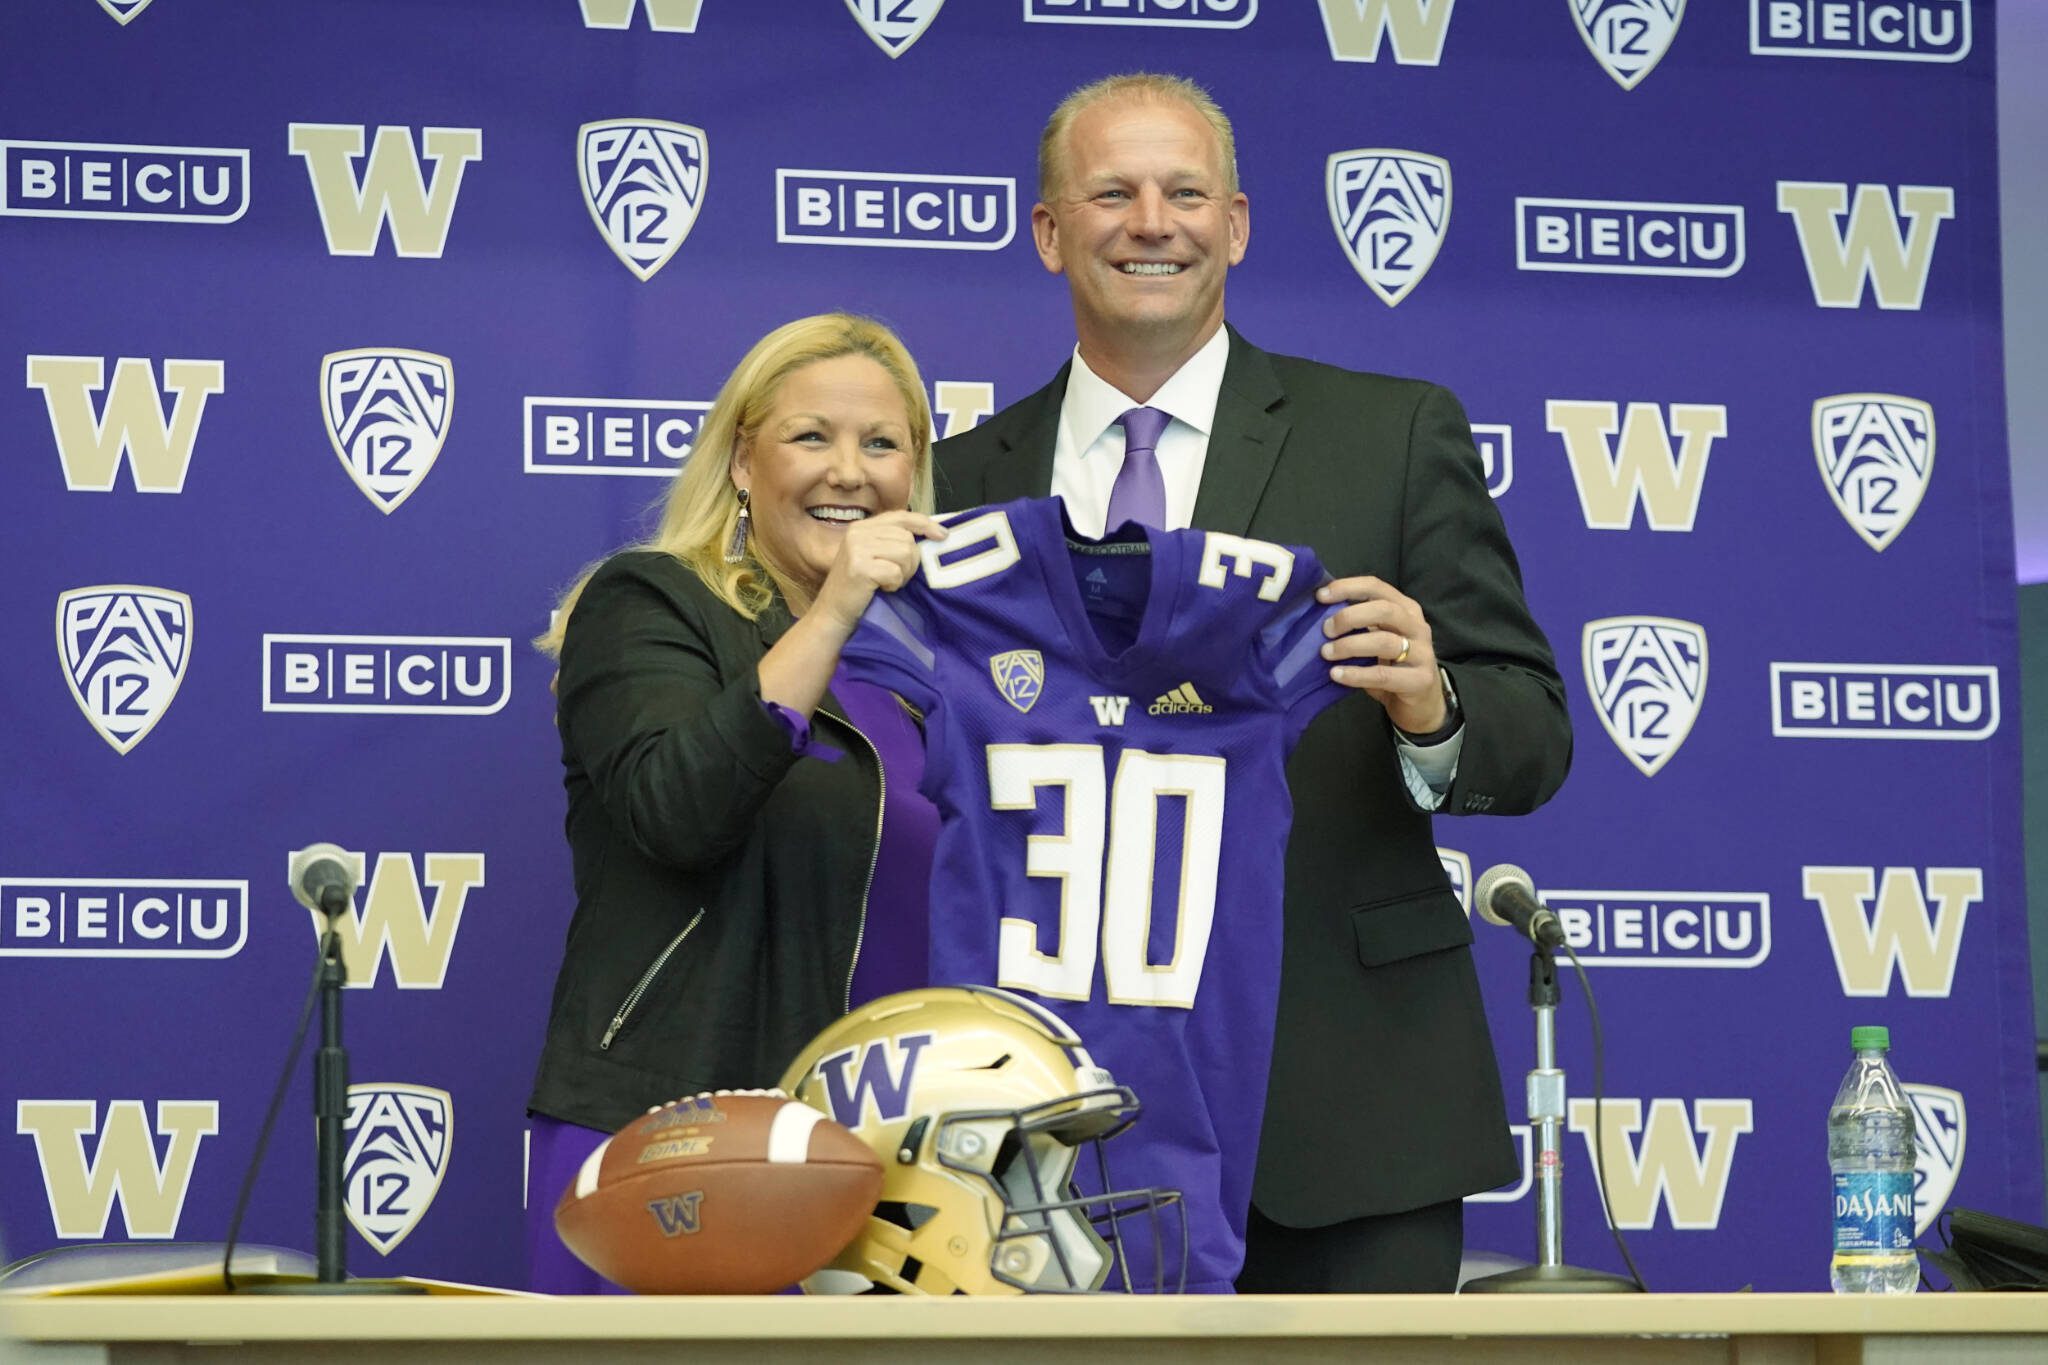 Washington athletic director Jen Cohen (left) poses for a photo with Kalen DeBoer during a news conference to introduce DeBoer as the new head football coach on Nov. 30, 2021, in Seattle. (AP Photo/Ted S. Warren)